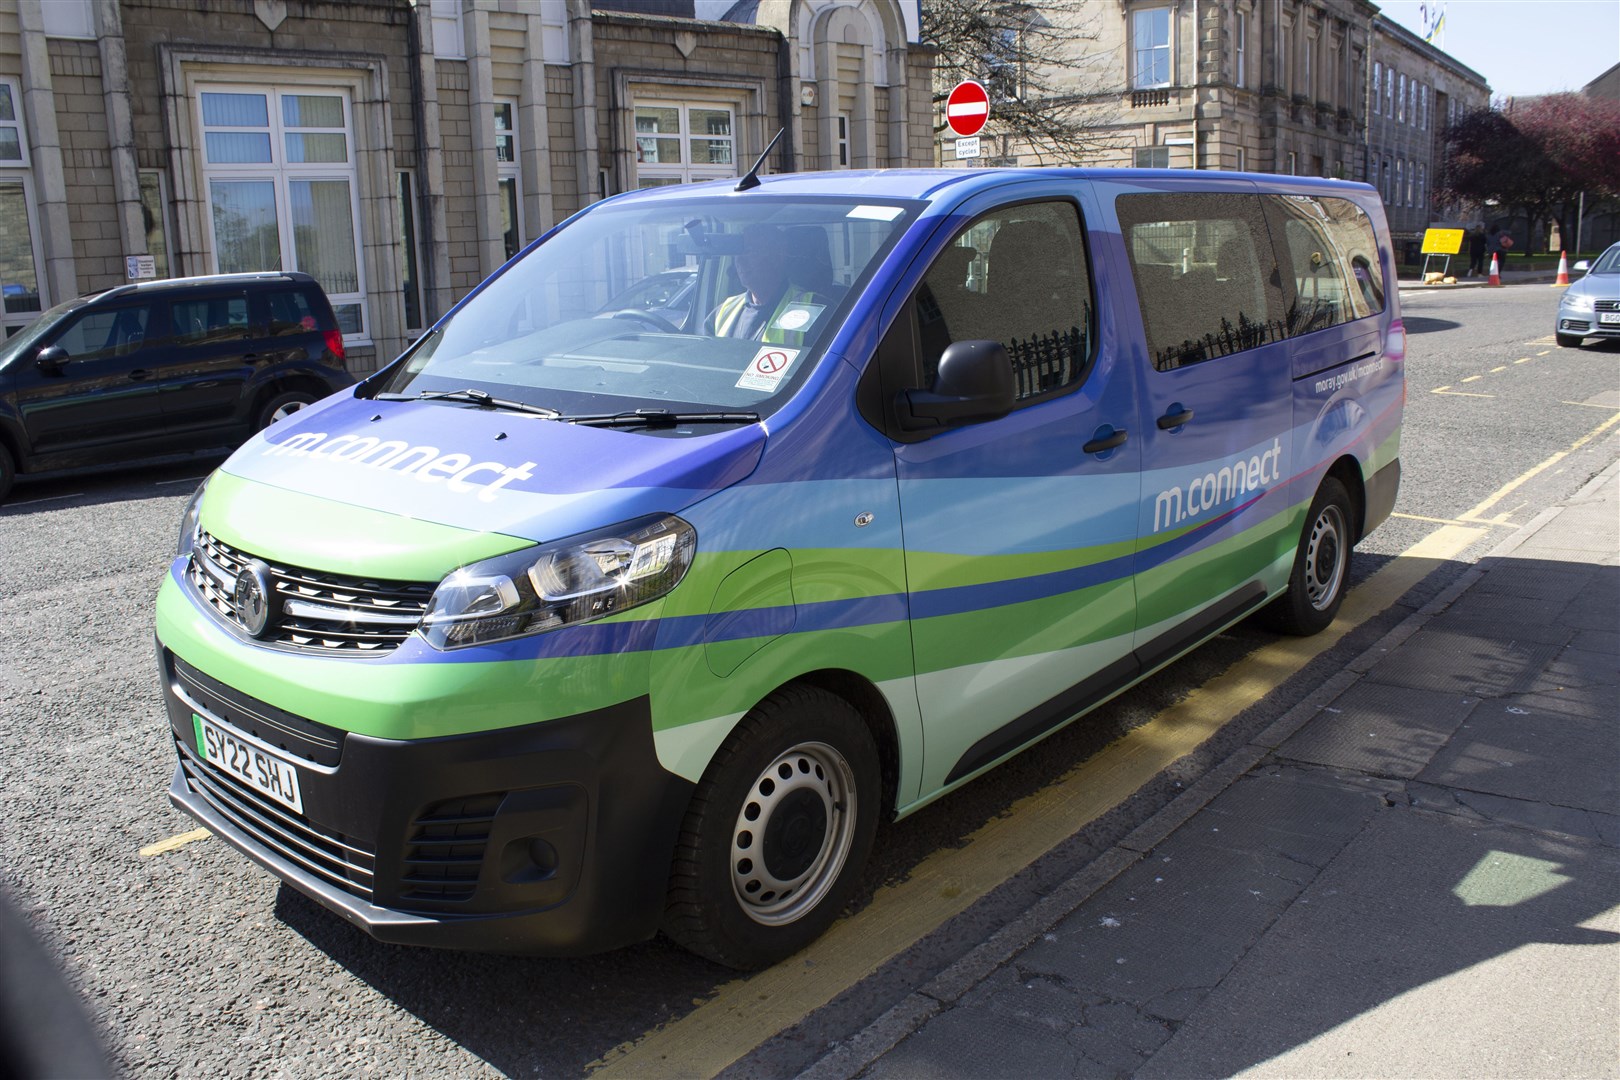 The on-demand service will cover the whole of Moray.